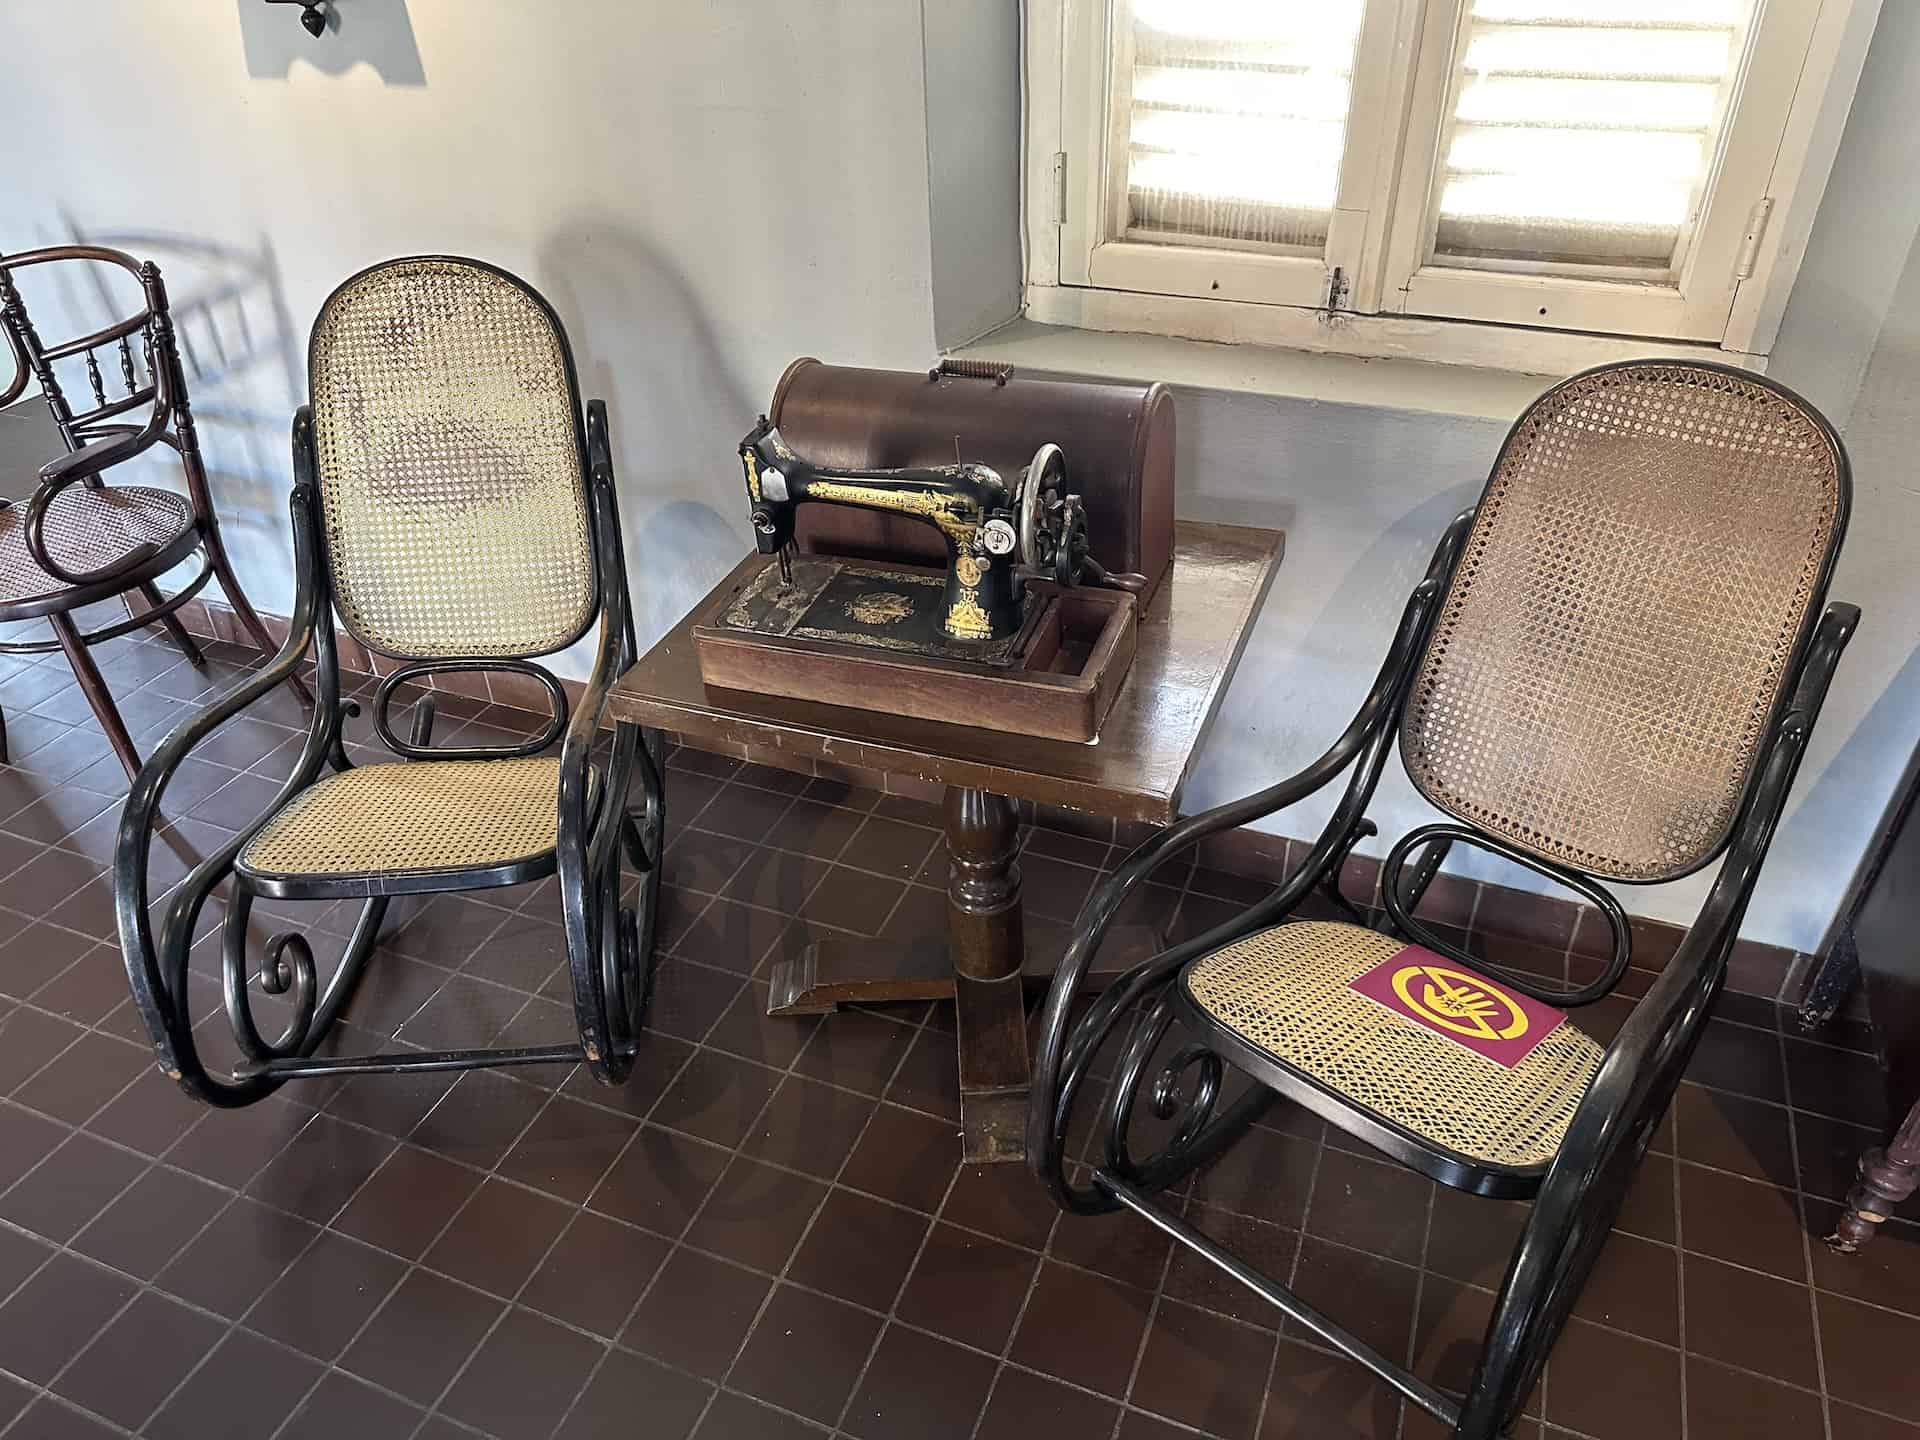 Sewing machine and rocking chairs at the Historical Museum of Aruba